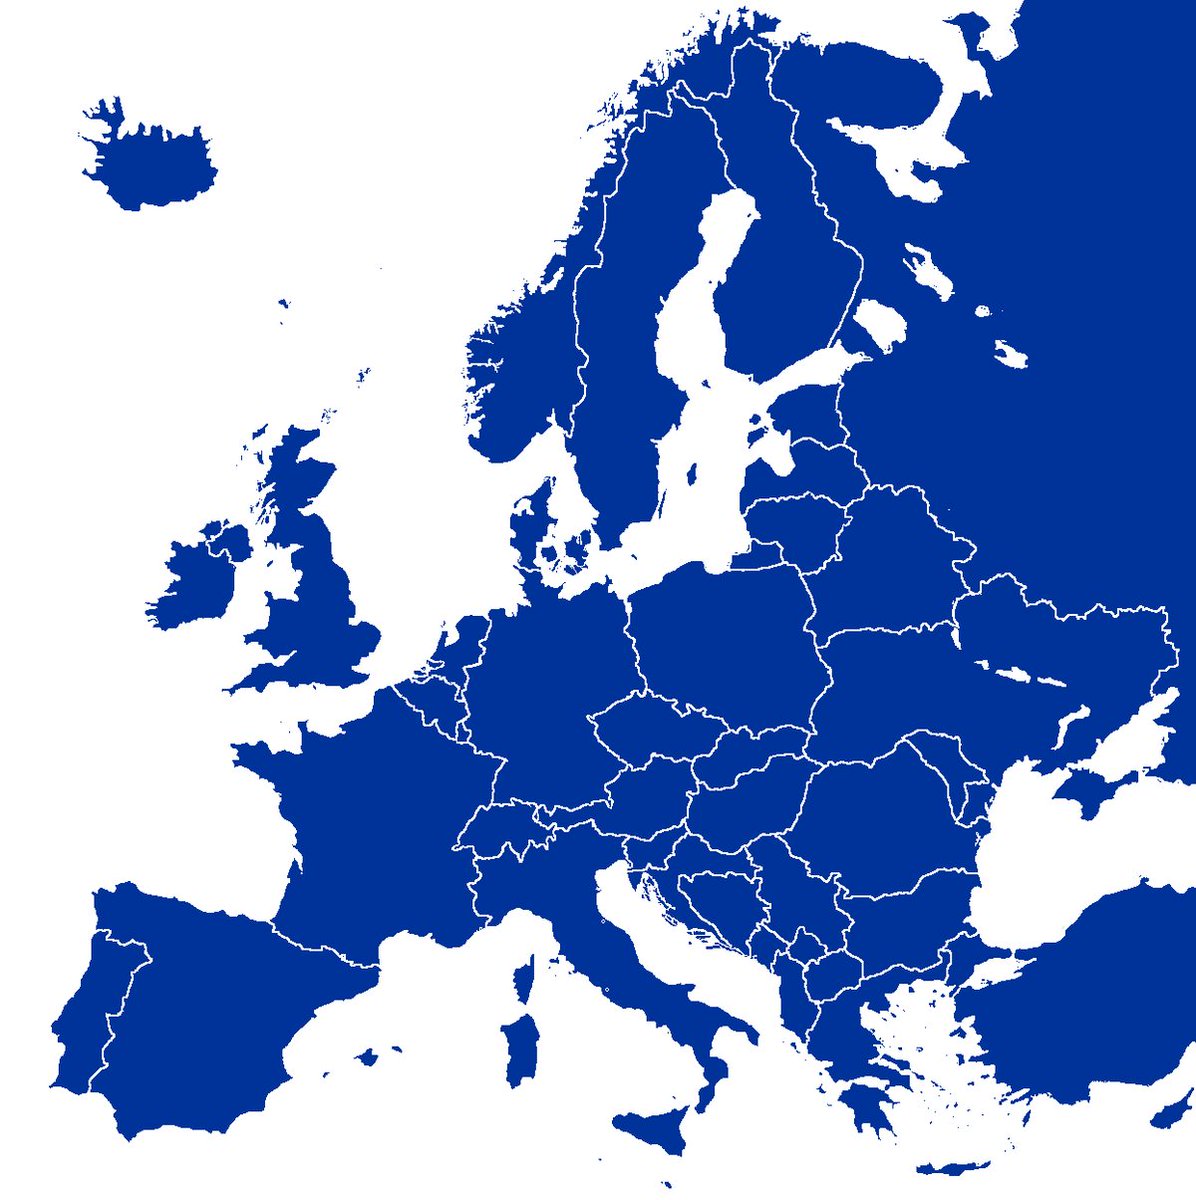 Looking for more @InterdemEurope members & researchers in #dementia #inequalities to join our new @InterdemEurope Taskforce on the topic area! We need you if you live in Europe and conduct research in the field - drop me a tweet/DM!